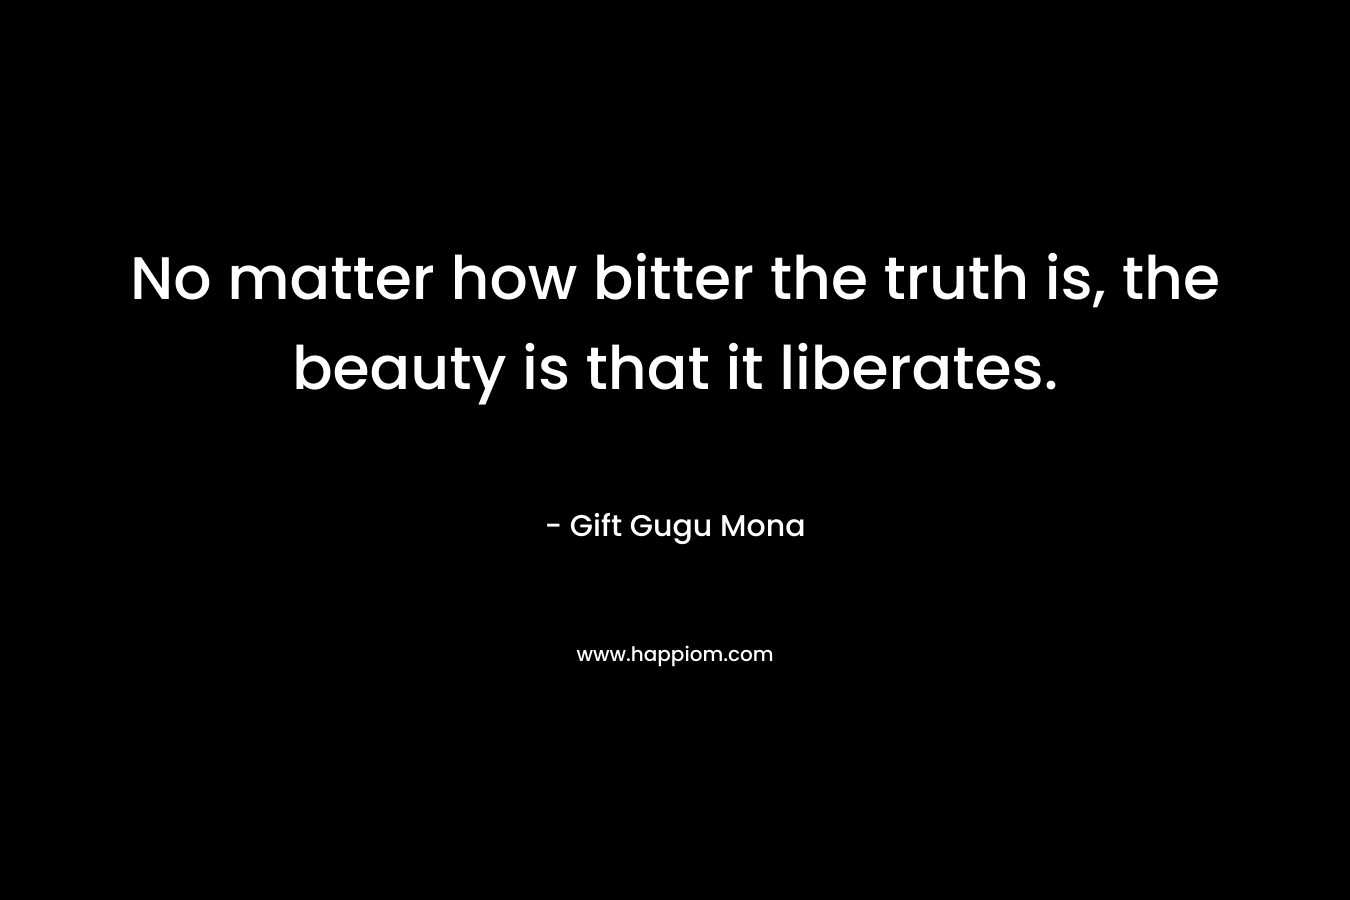 No matter how bitter the truth is, the beauty is that it liberates.